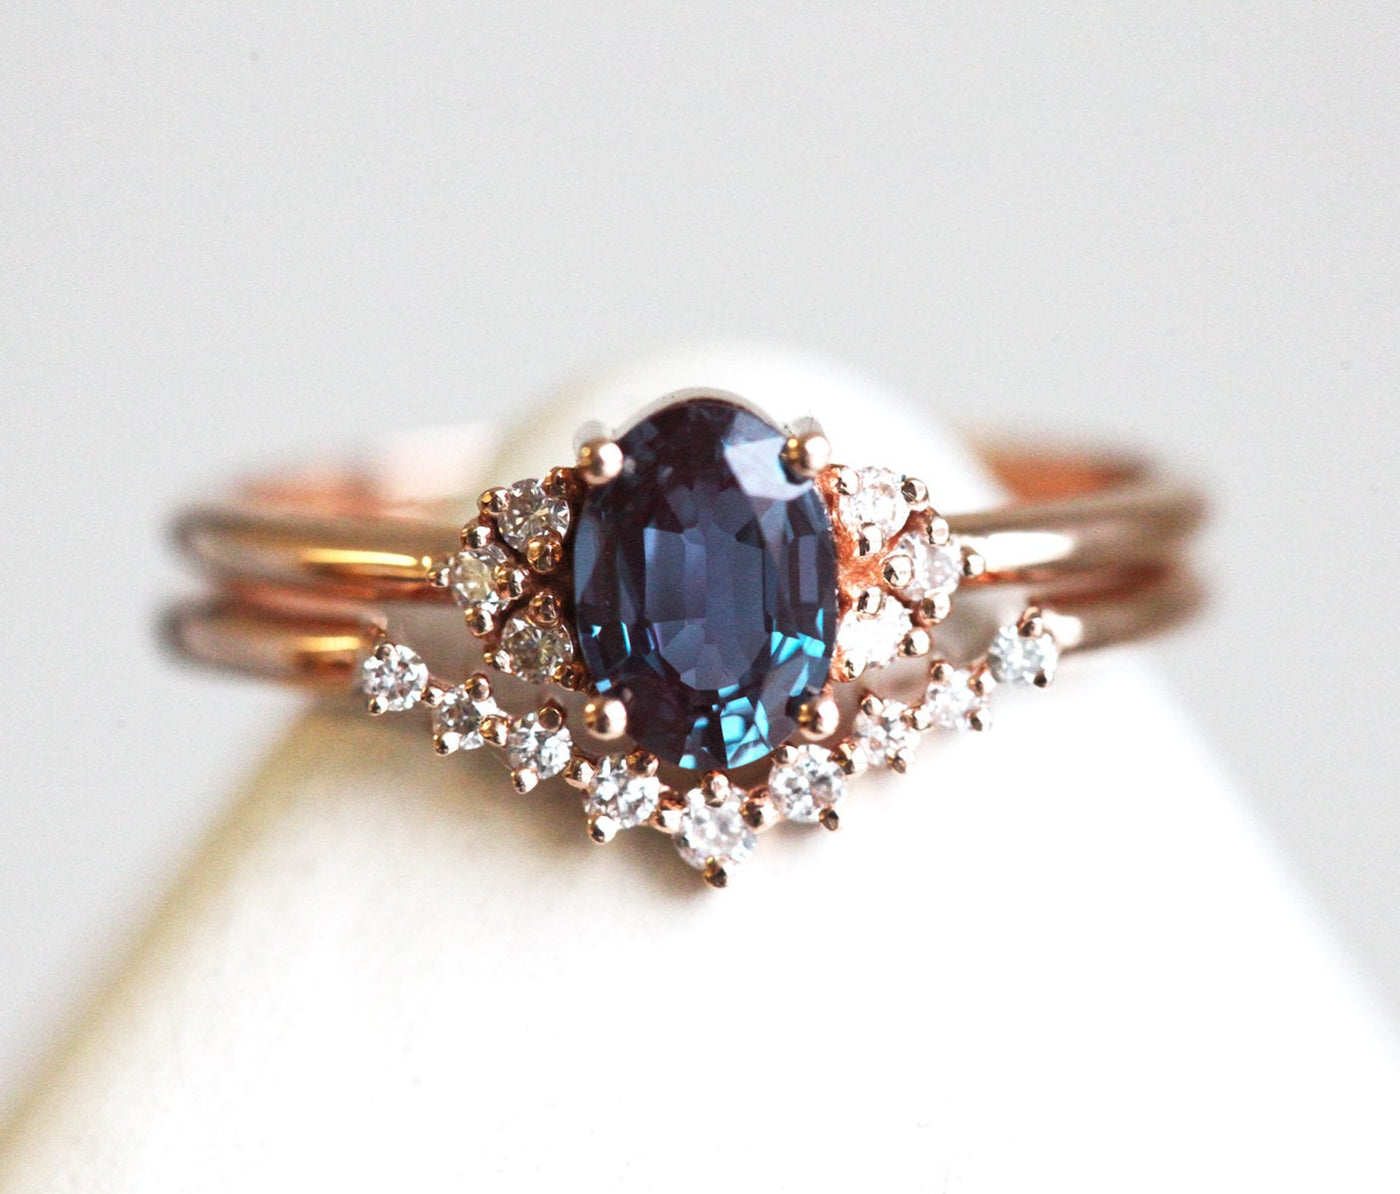 Teal Oval Alexandrite Ring with 6 Side Round White Diamonds with V-Shaped Diamond Band